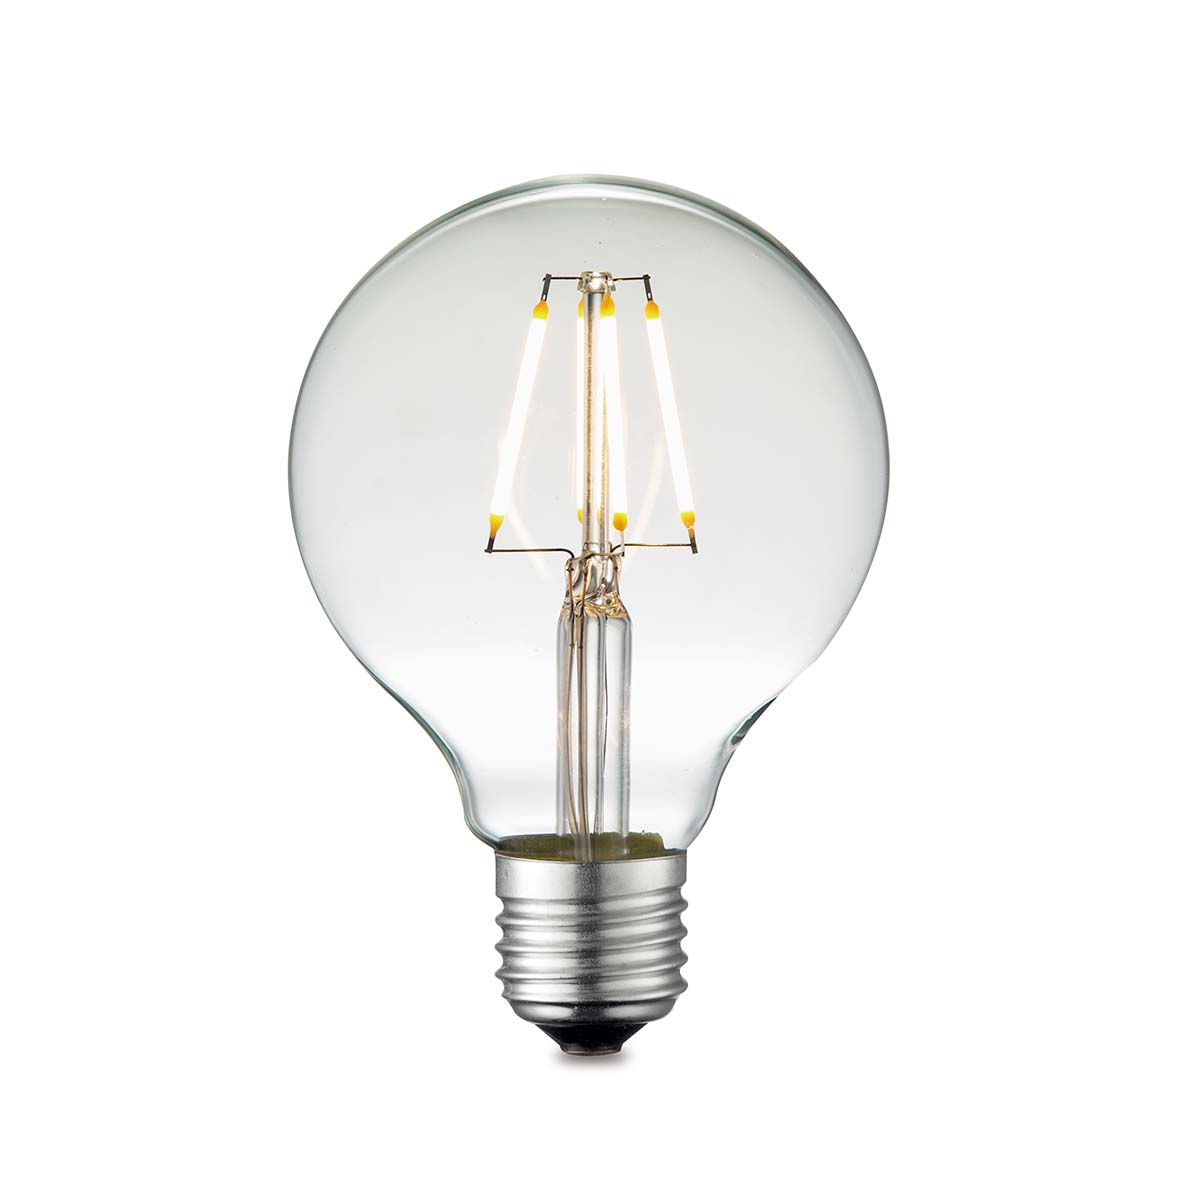 Tangla lighting - TLB-8003-02CL - LED Light Bulb Deco filament - G80 2W clear - non dimmable - E27